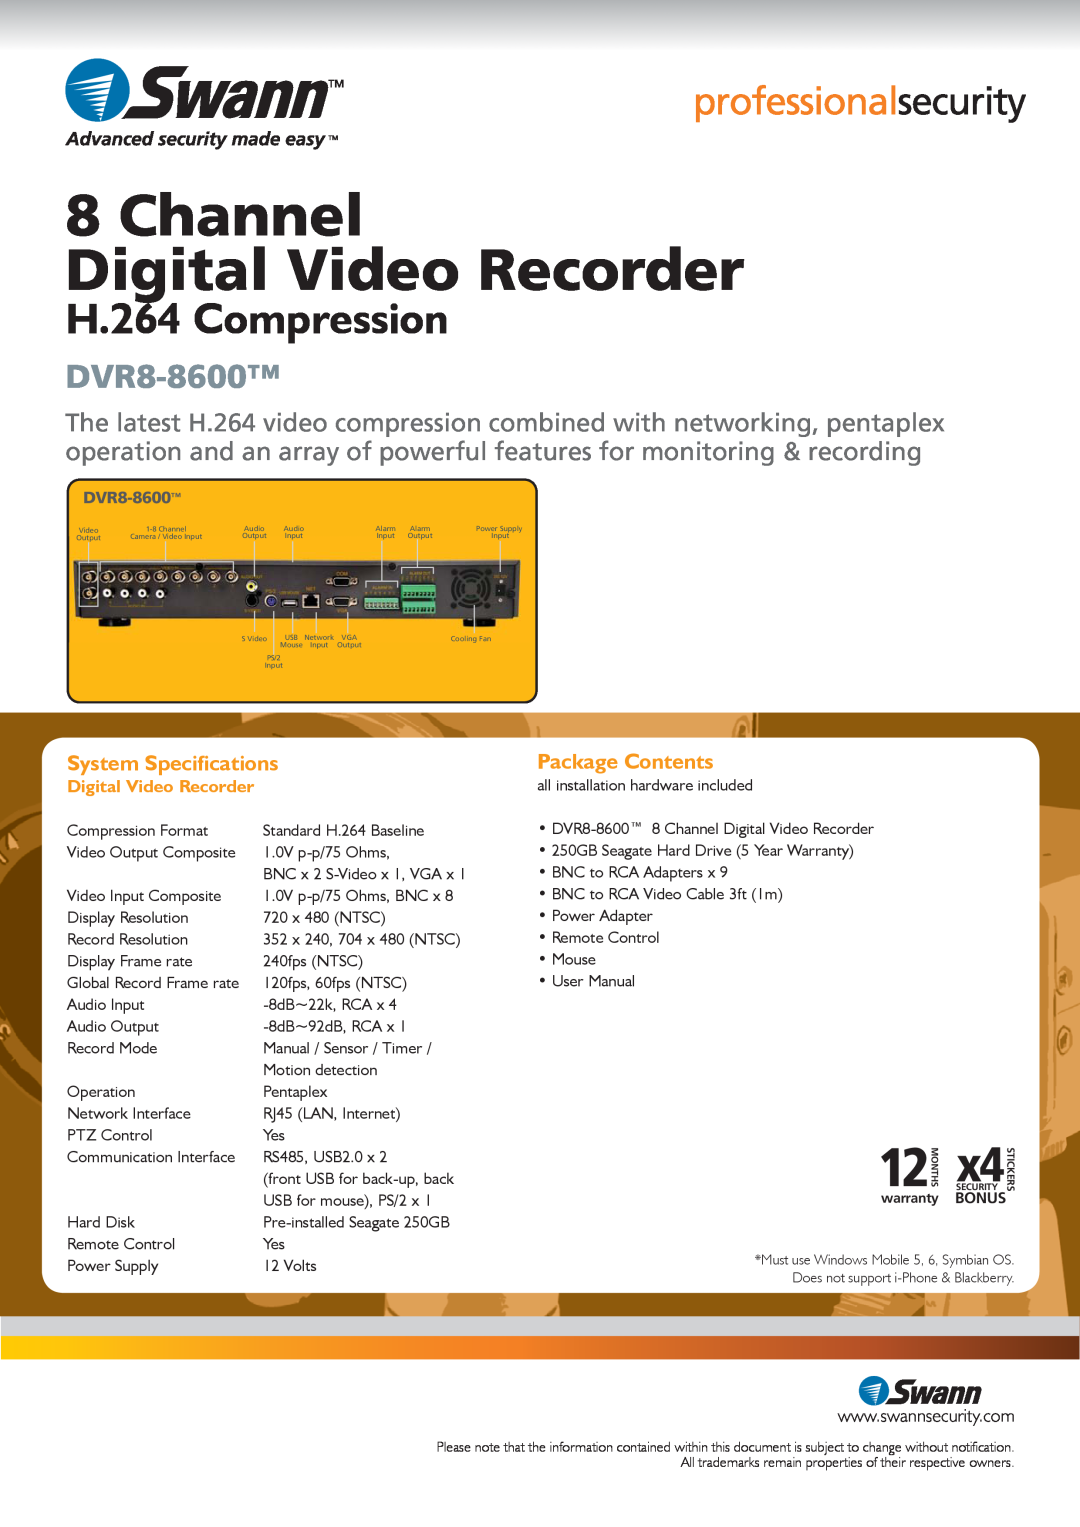 Swann SW242-8TH Channel Digital Video Recorder, H.264 Compression, DVR8-8600, System Specifications, Package Contents 